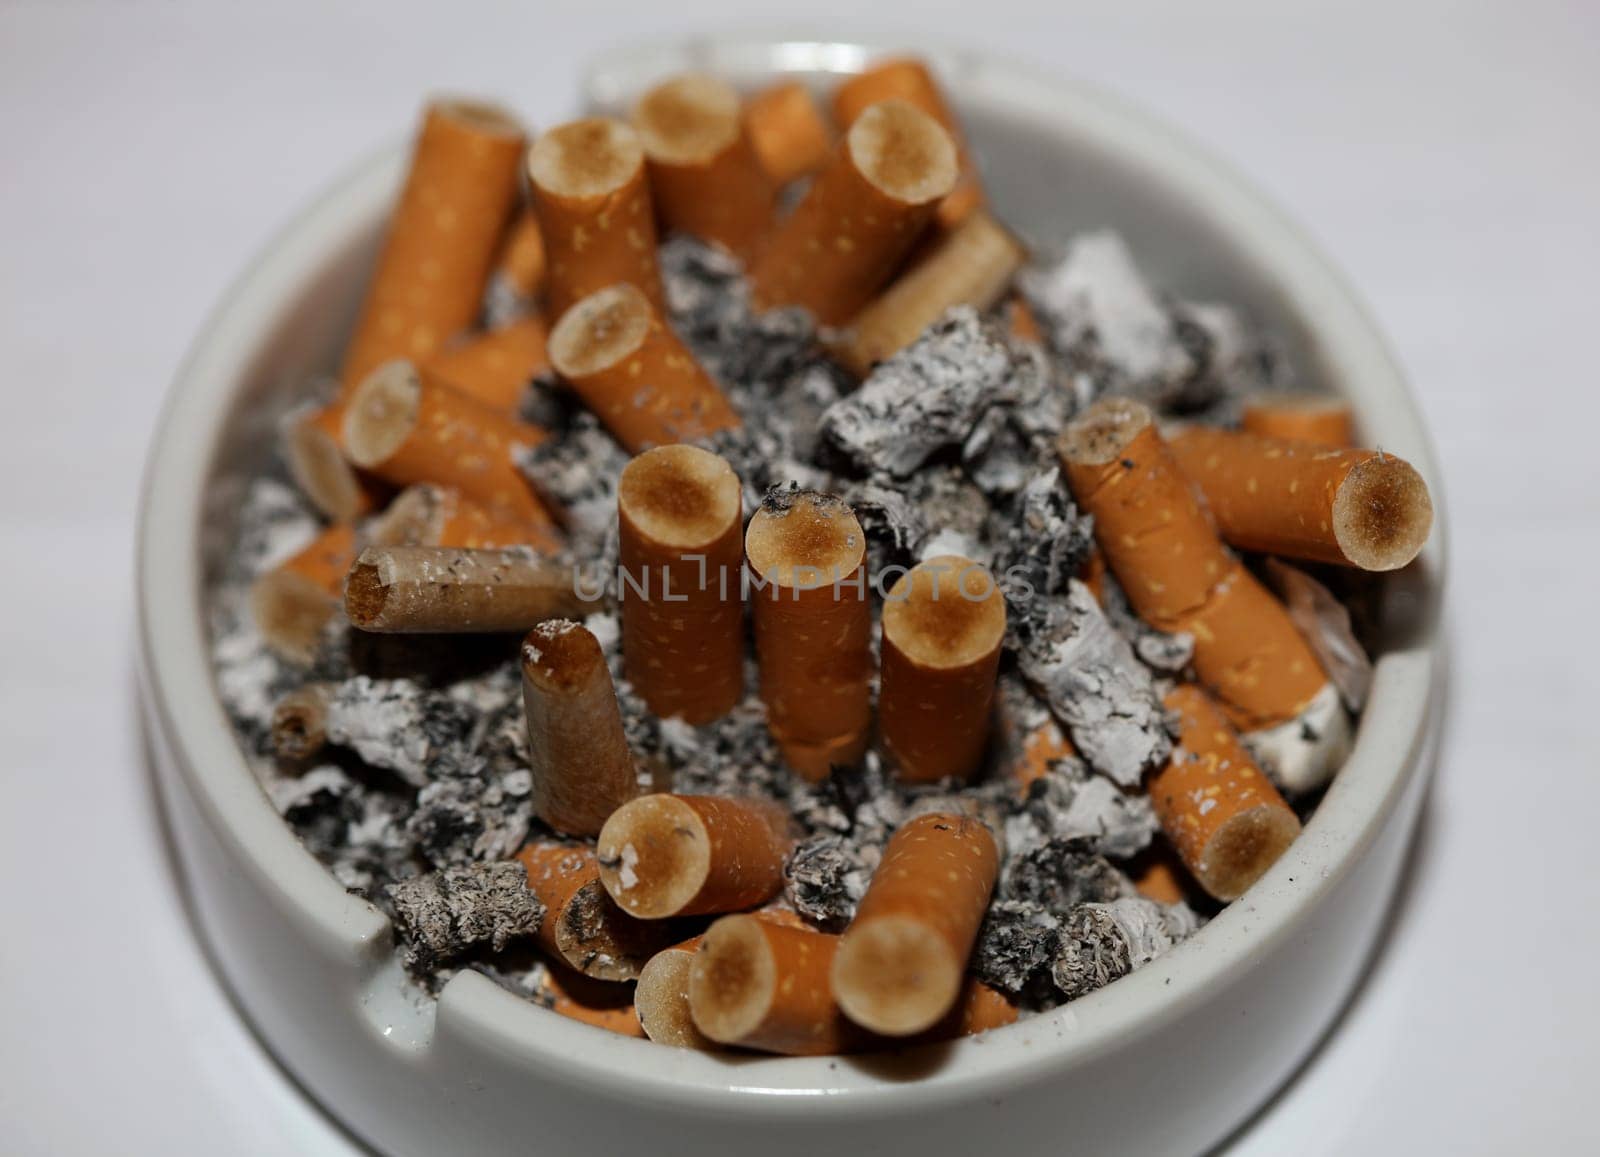 Full ashtray of cigarettes close up macro view smoking habits hi-res stock photography and images high quality big size instant downloads